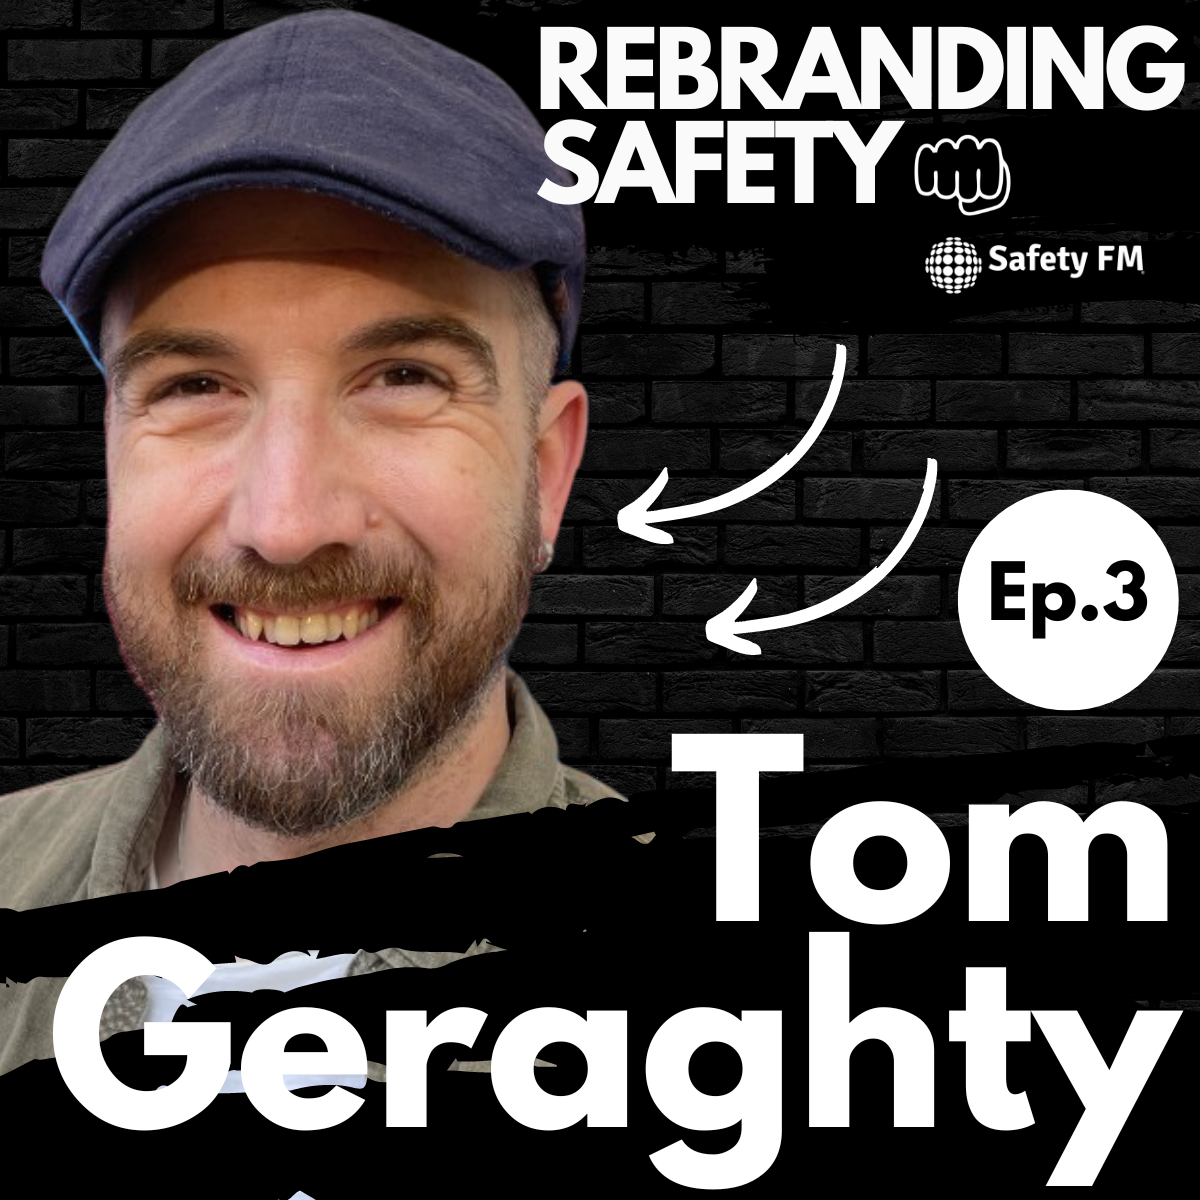 Rebranding Safety with Tom Geraghty - 'Work as Done' vs 'Work as Imagined'